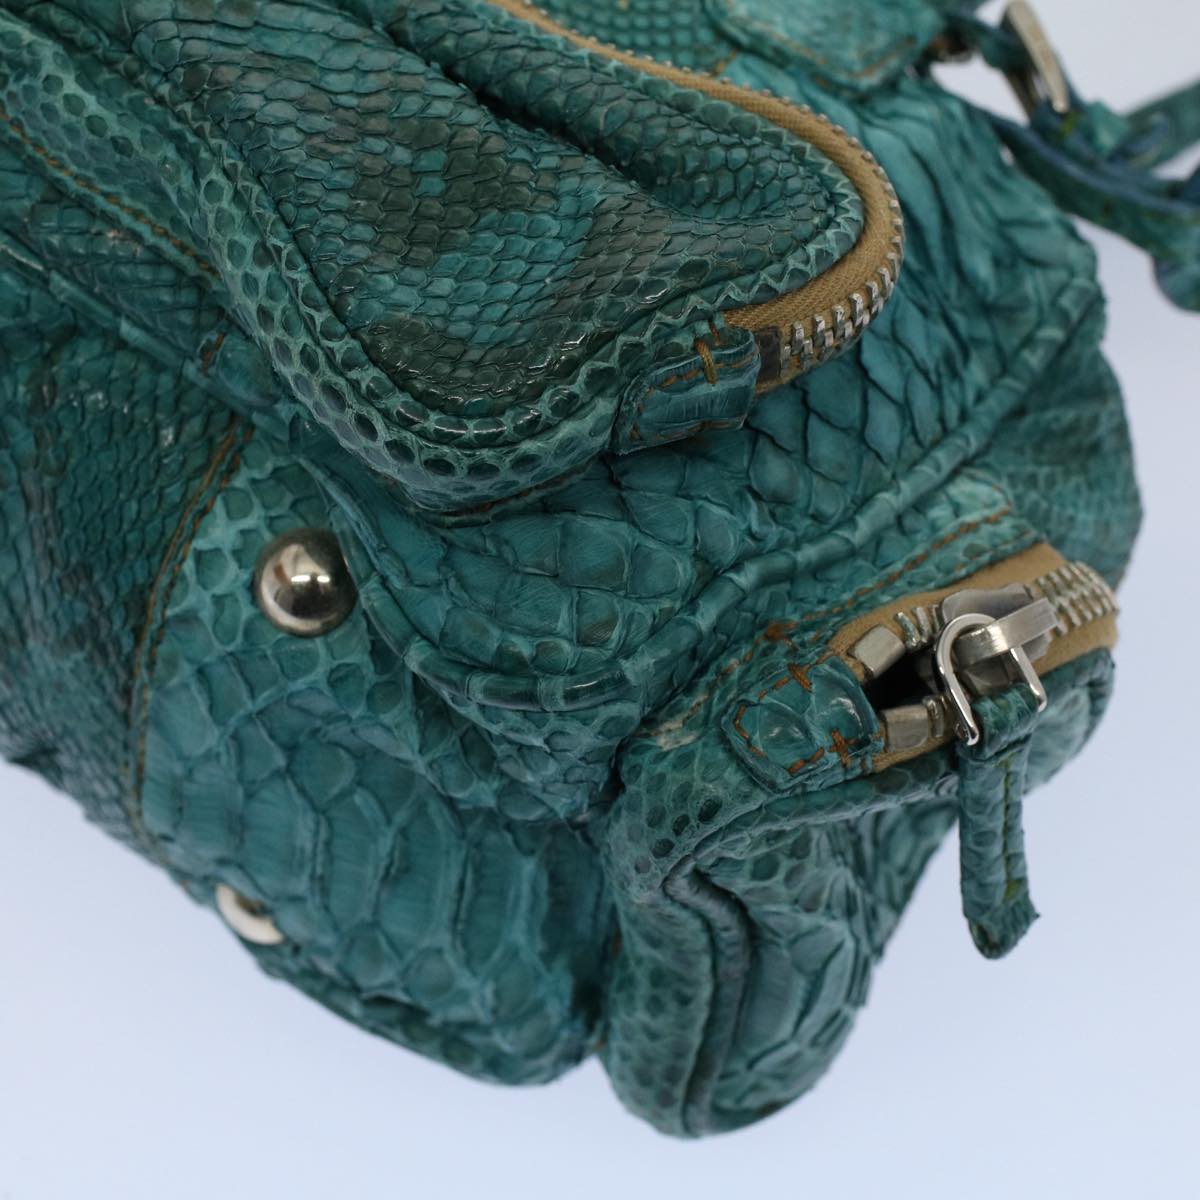 PRADA Snake pattern Hand Bag Exotic leather Turquoise Blue Auth 55080